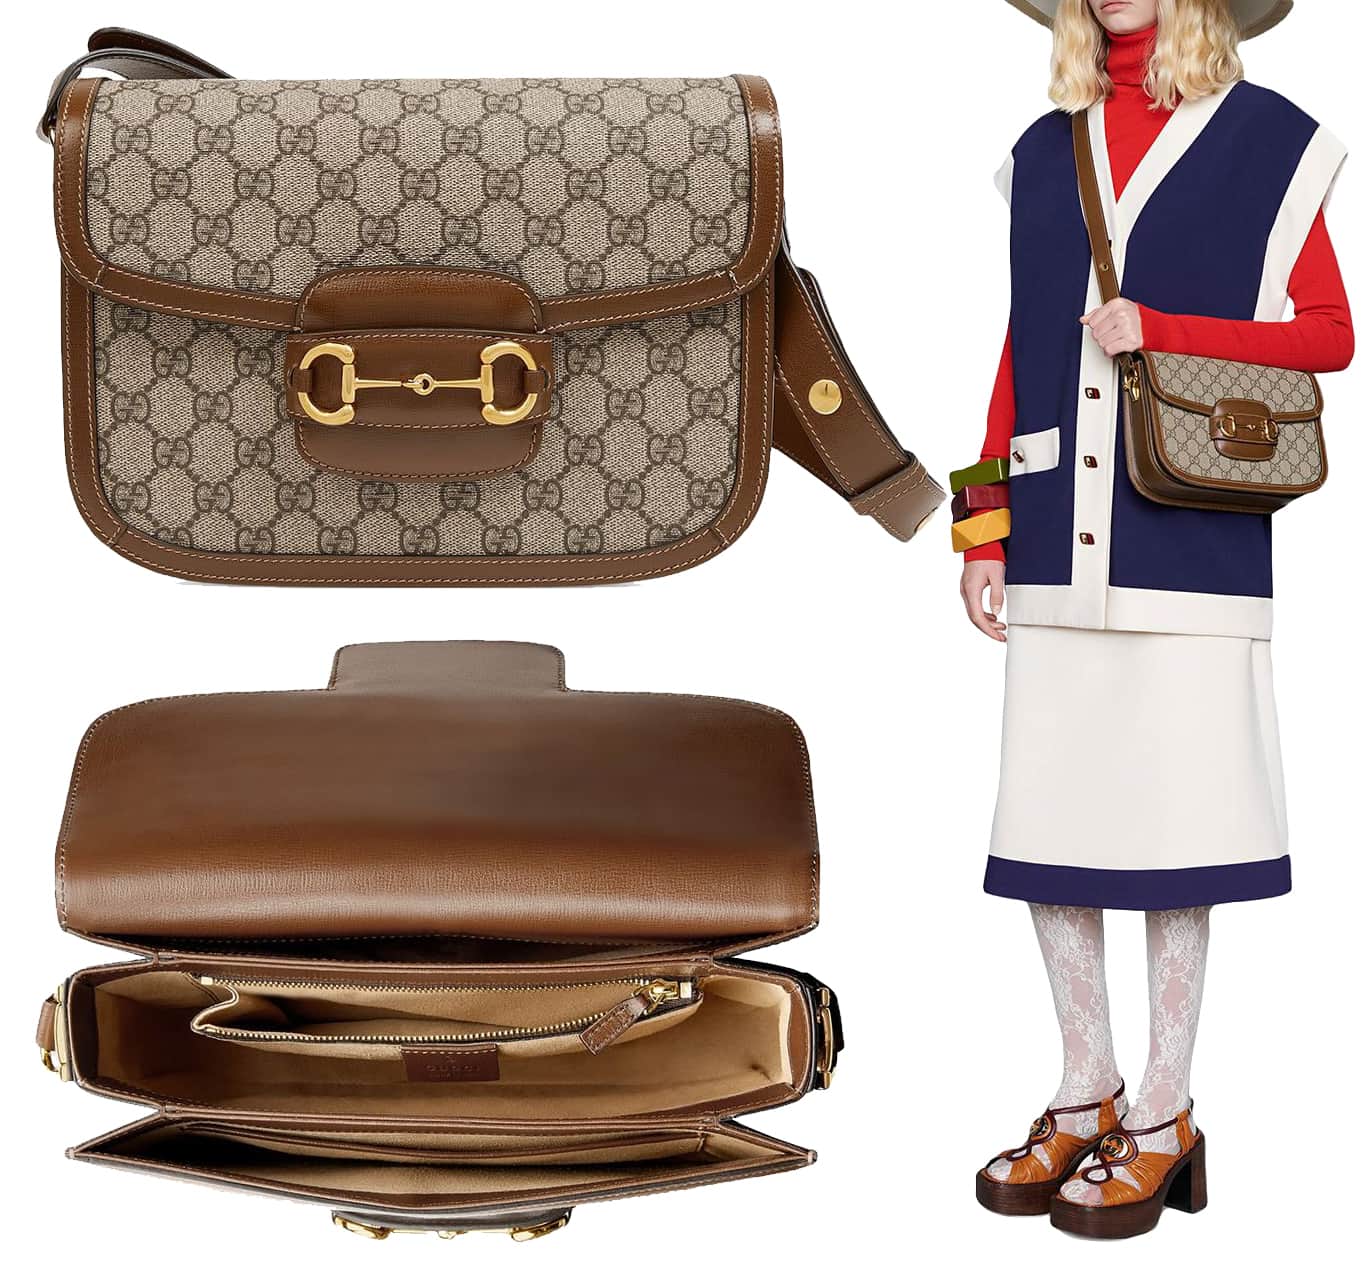 he Gucci 1955 Horsebit shoulder bag is another recreation of an archival design, featuring the Horsebit detail and beige monogram canvas